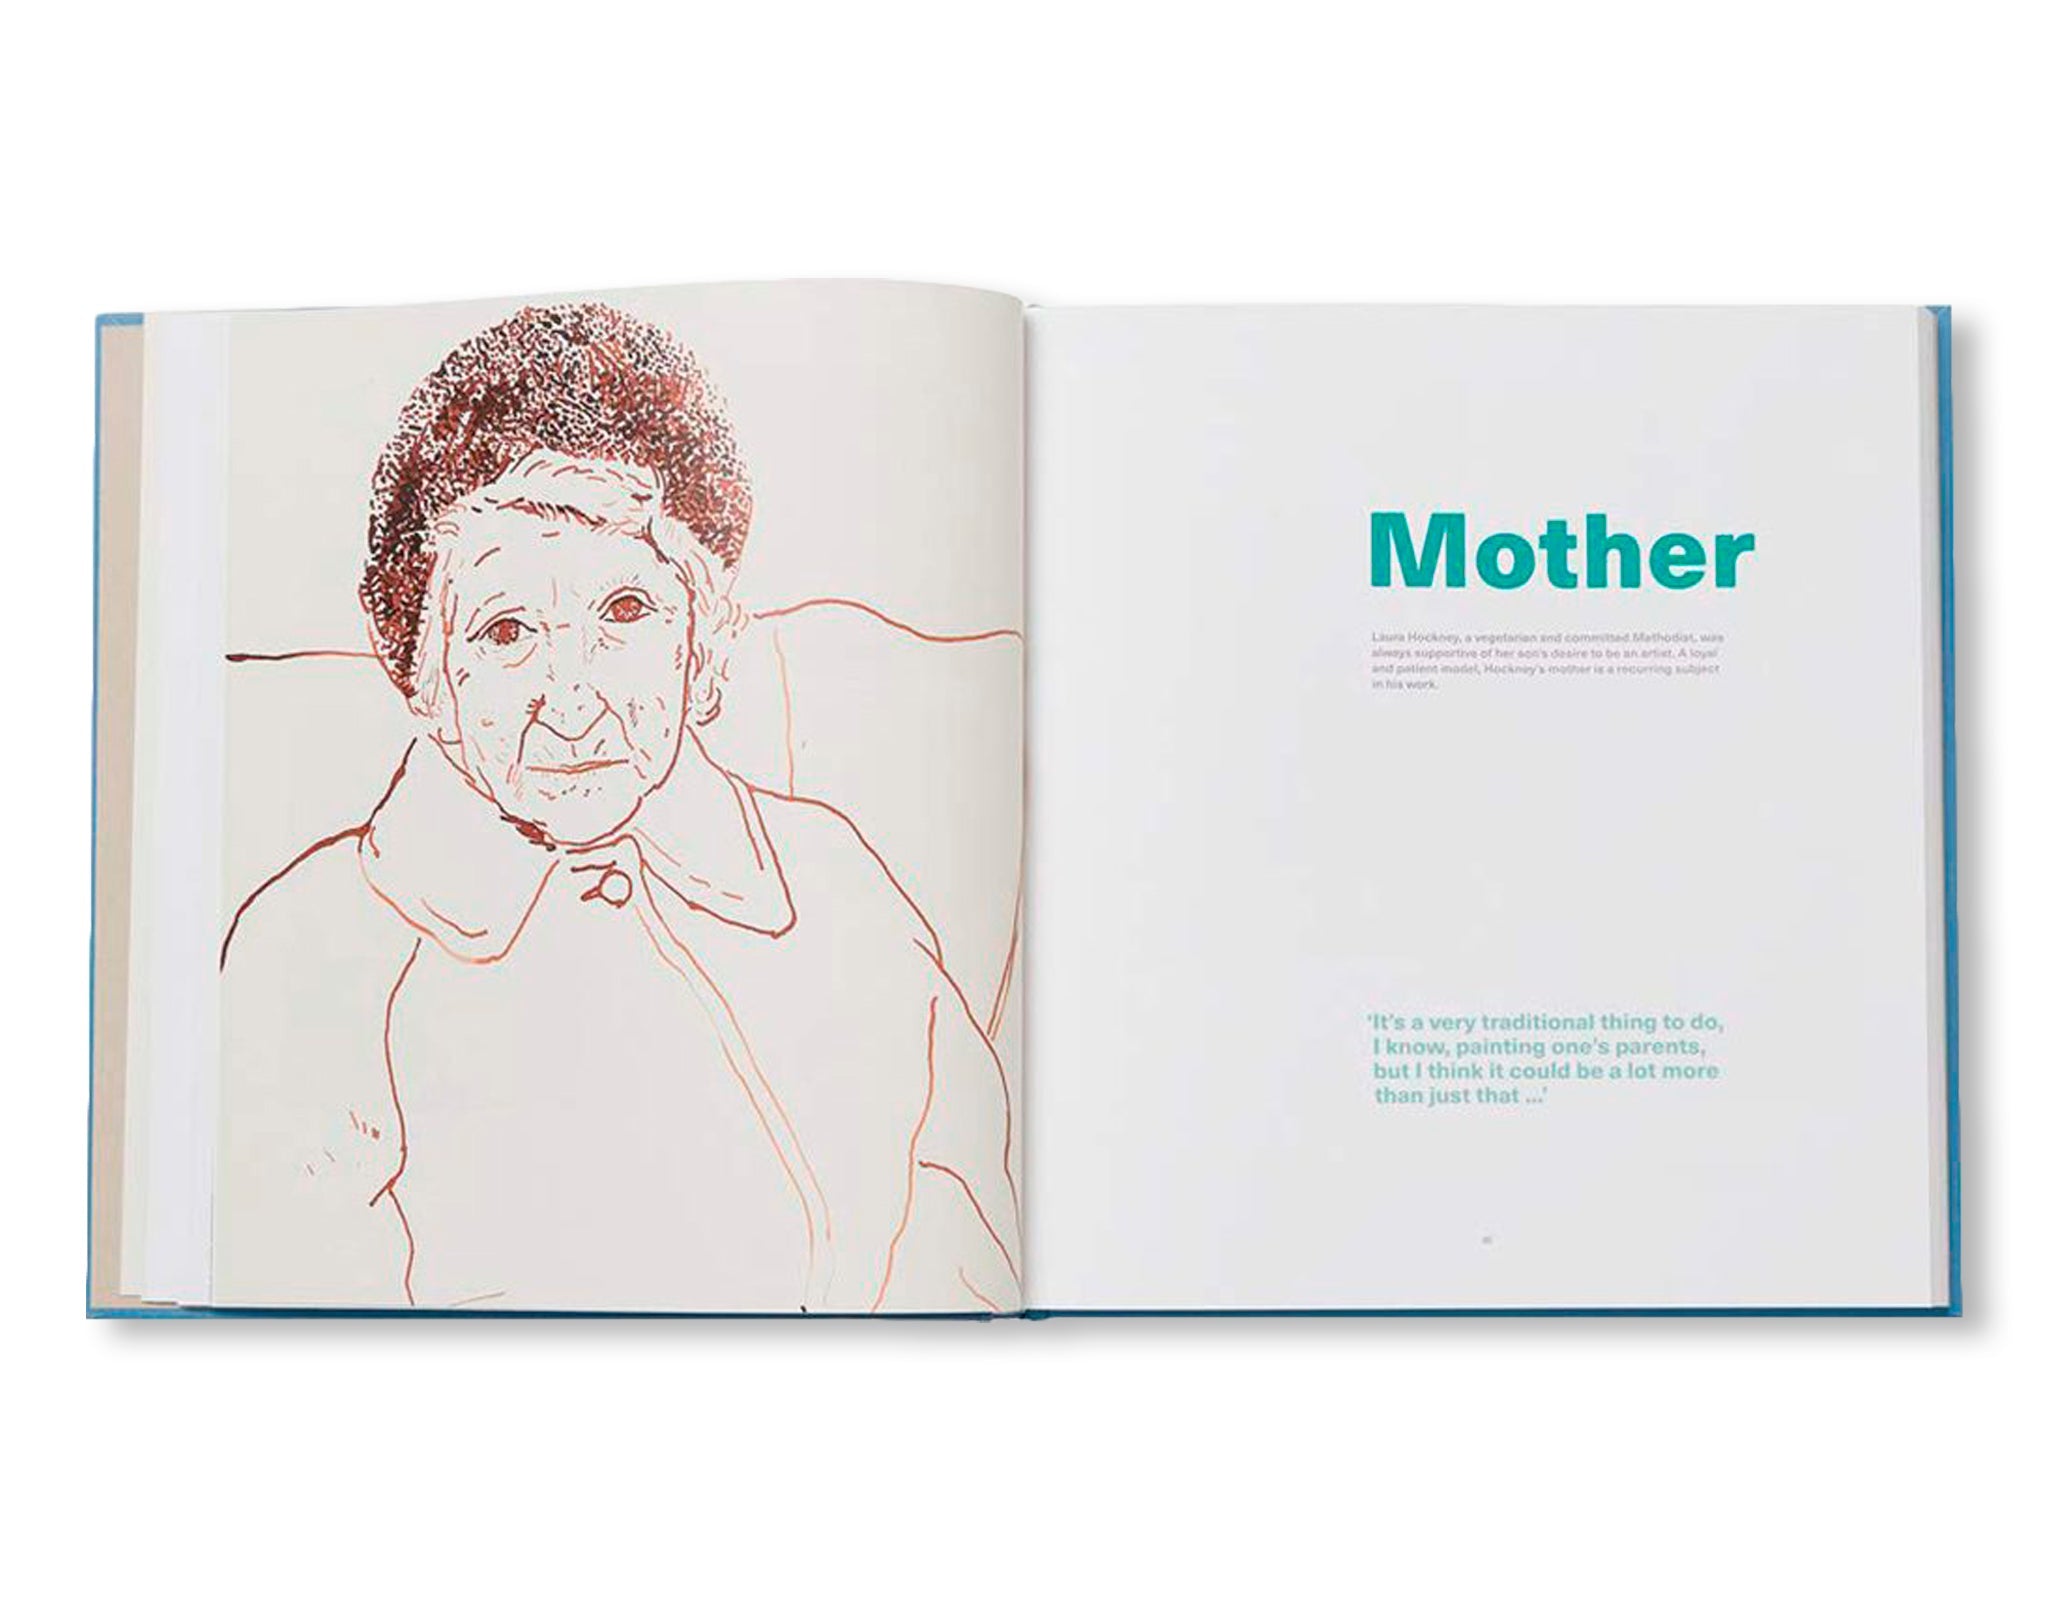 DRAWING FROM LIFE by David Hockney [SALE]